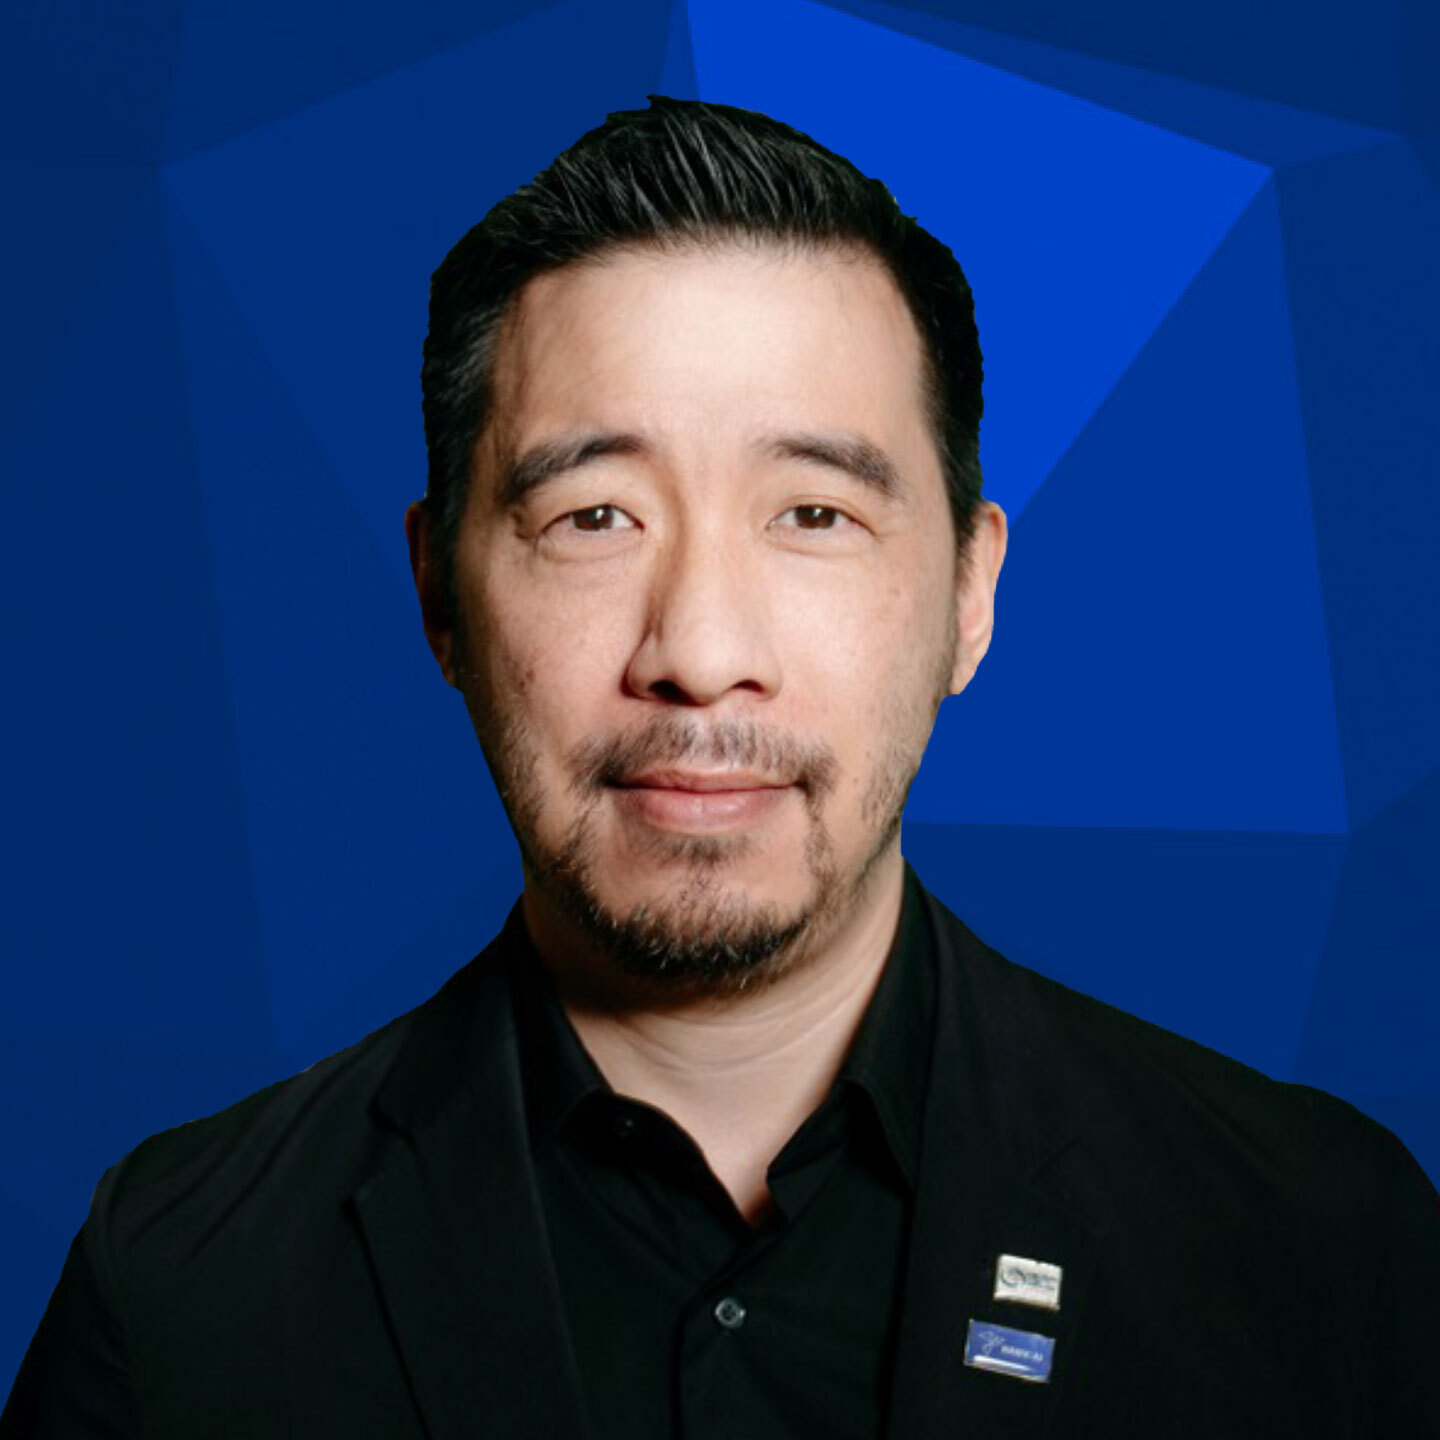 Robin Lee, General Manager of APAC